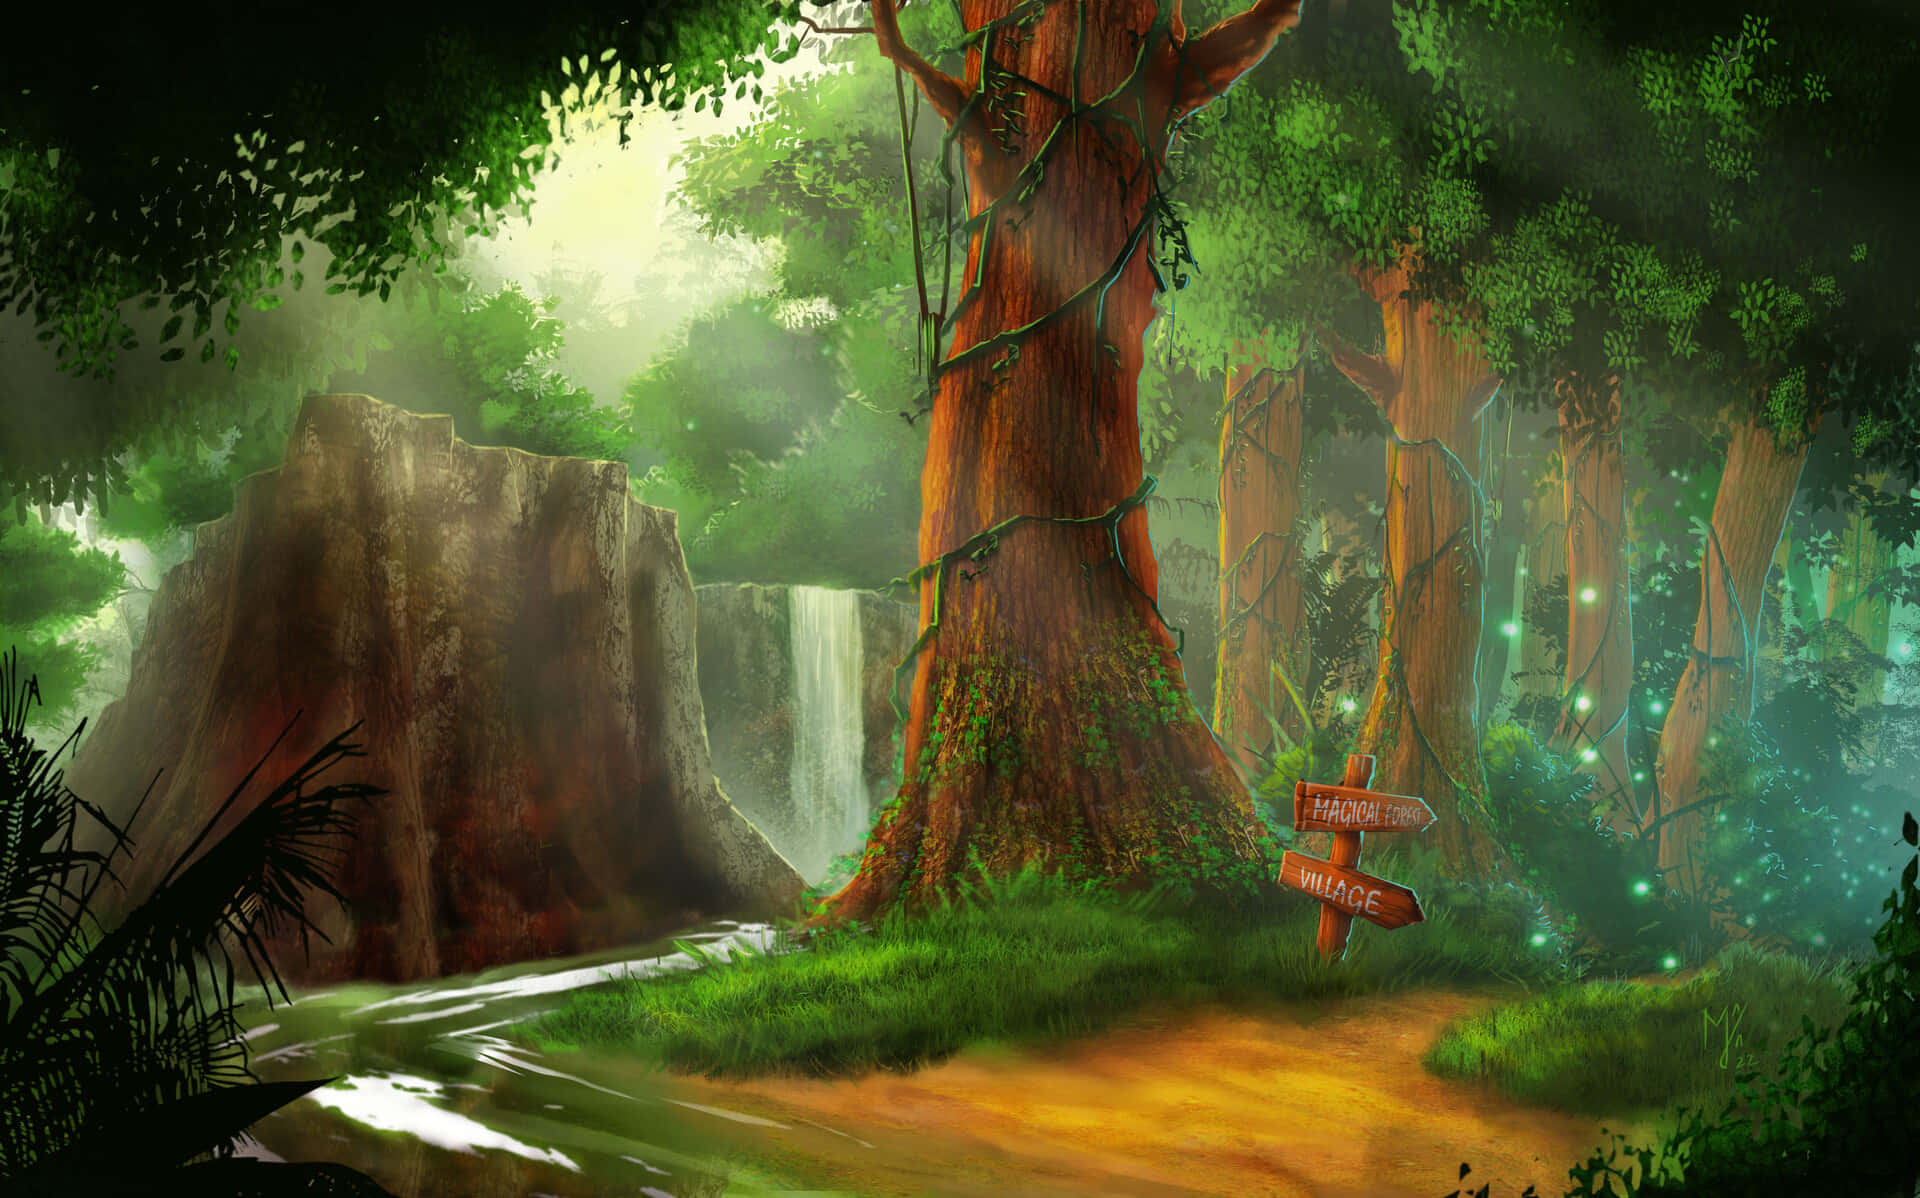 "Step Into the Magical Forest and Leave the Real World Behind"